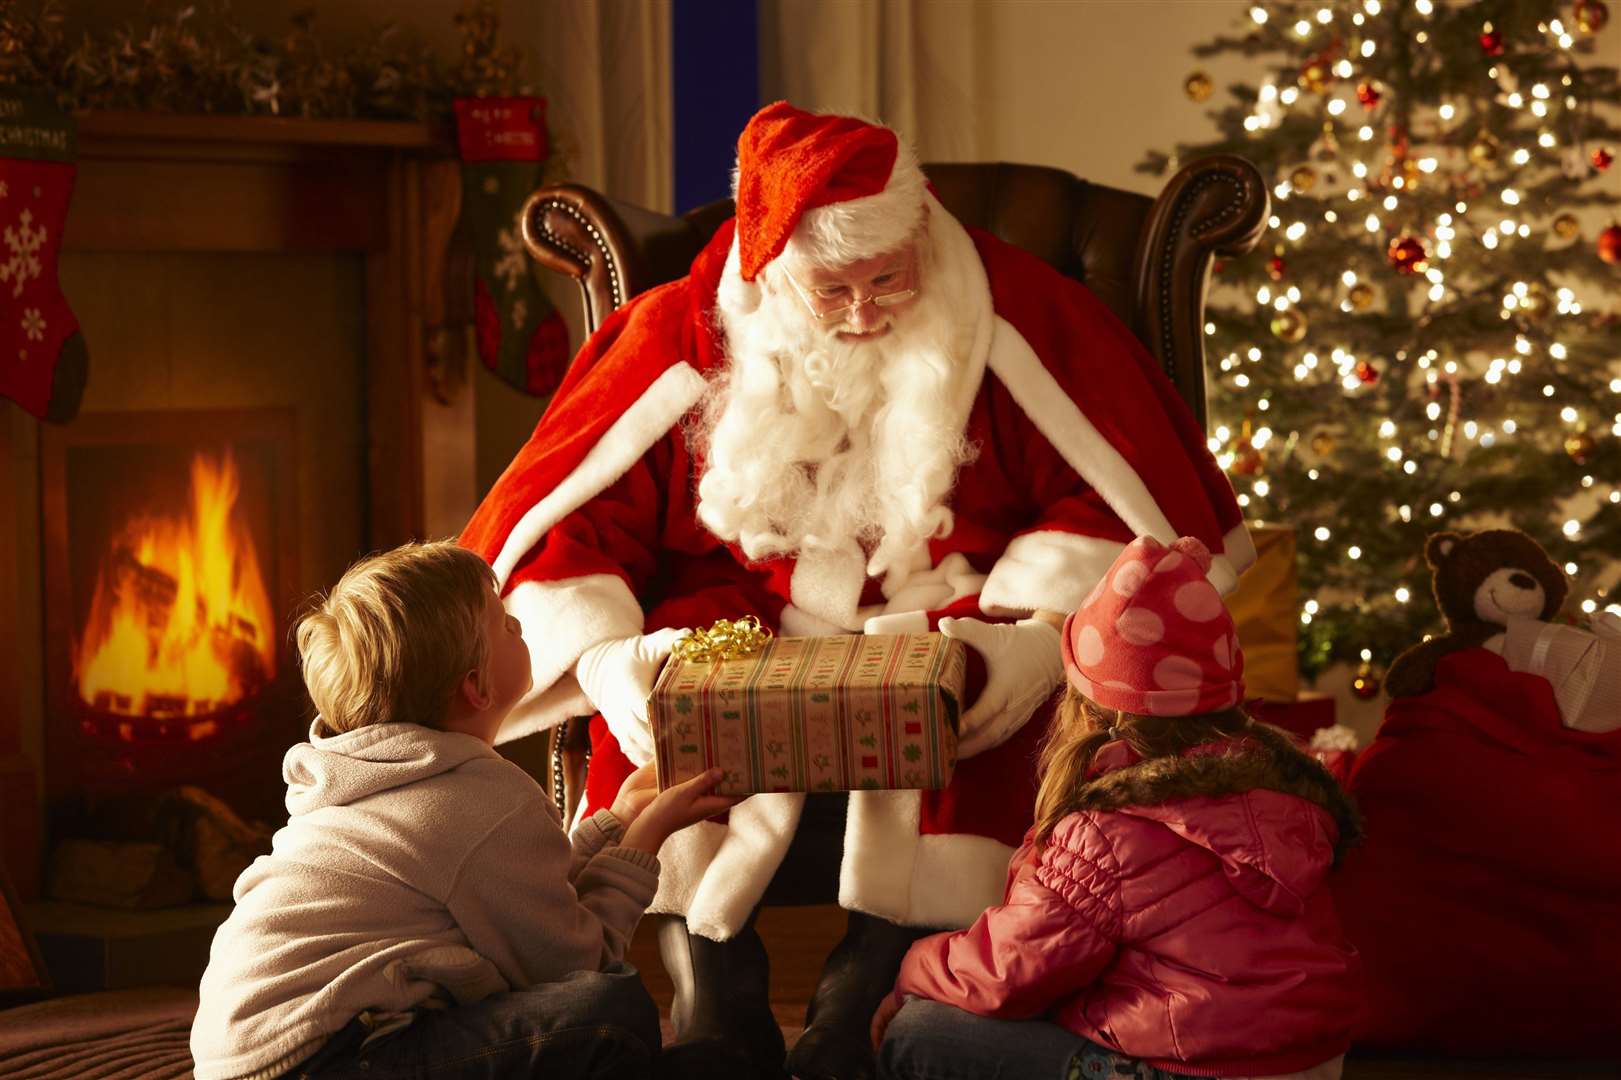 Father Christmas will be in his grotto at sites across Kent